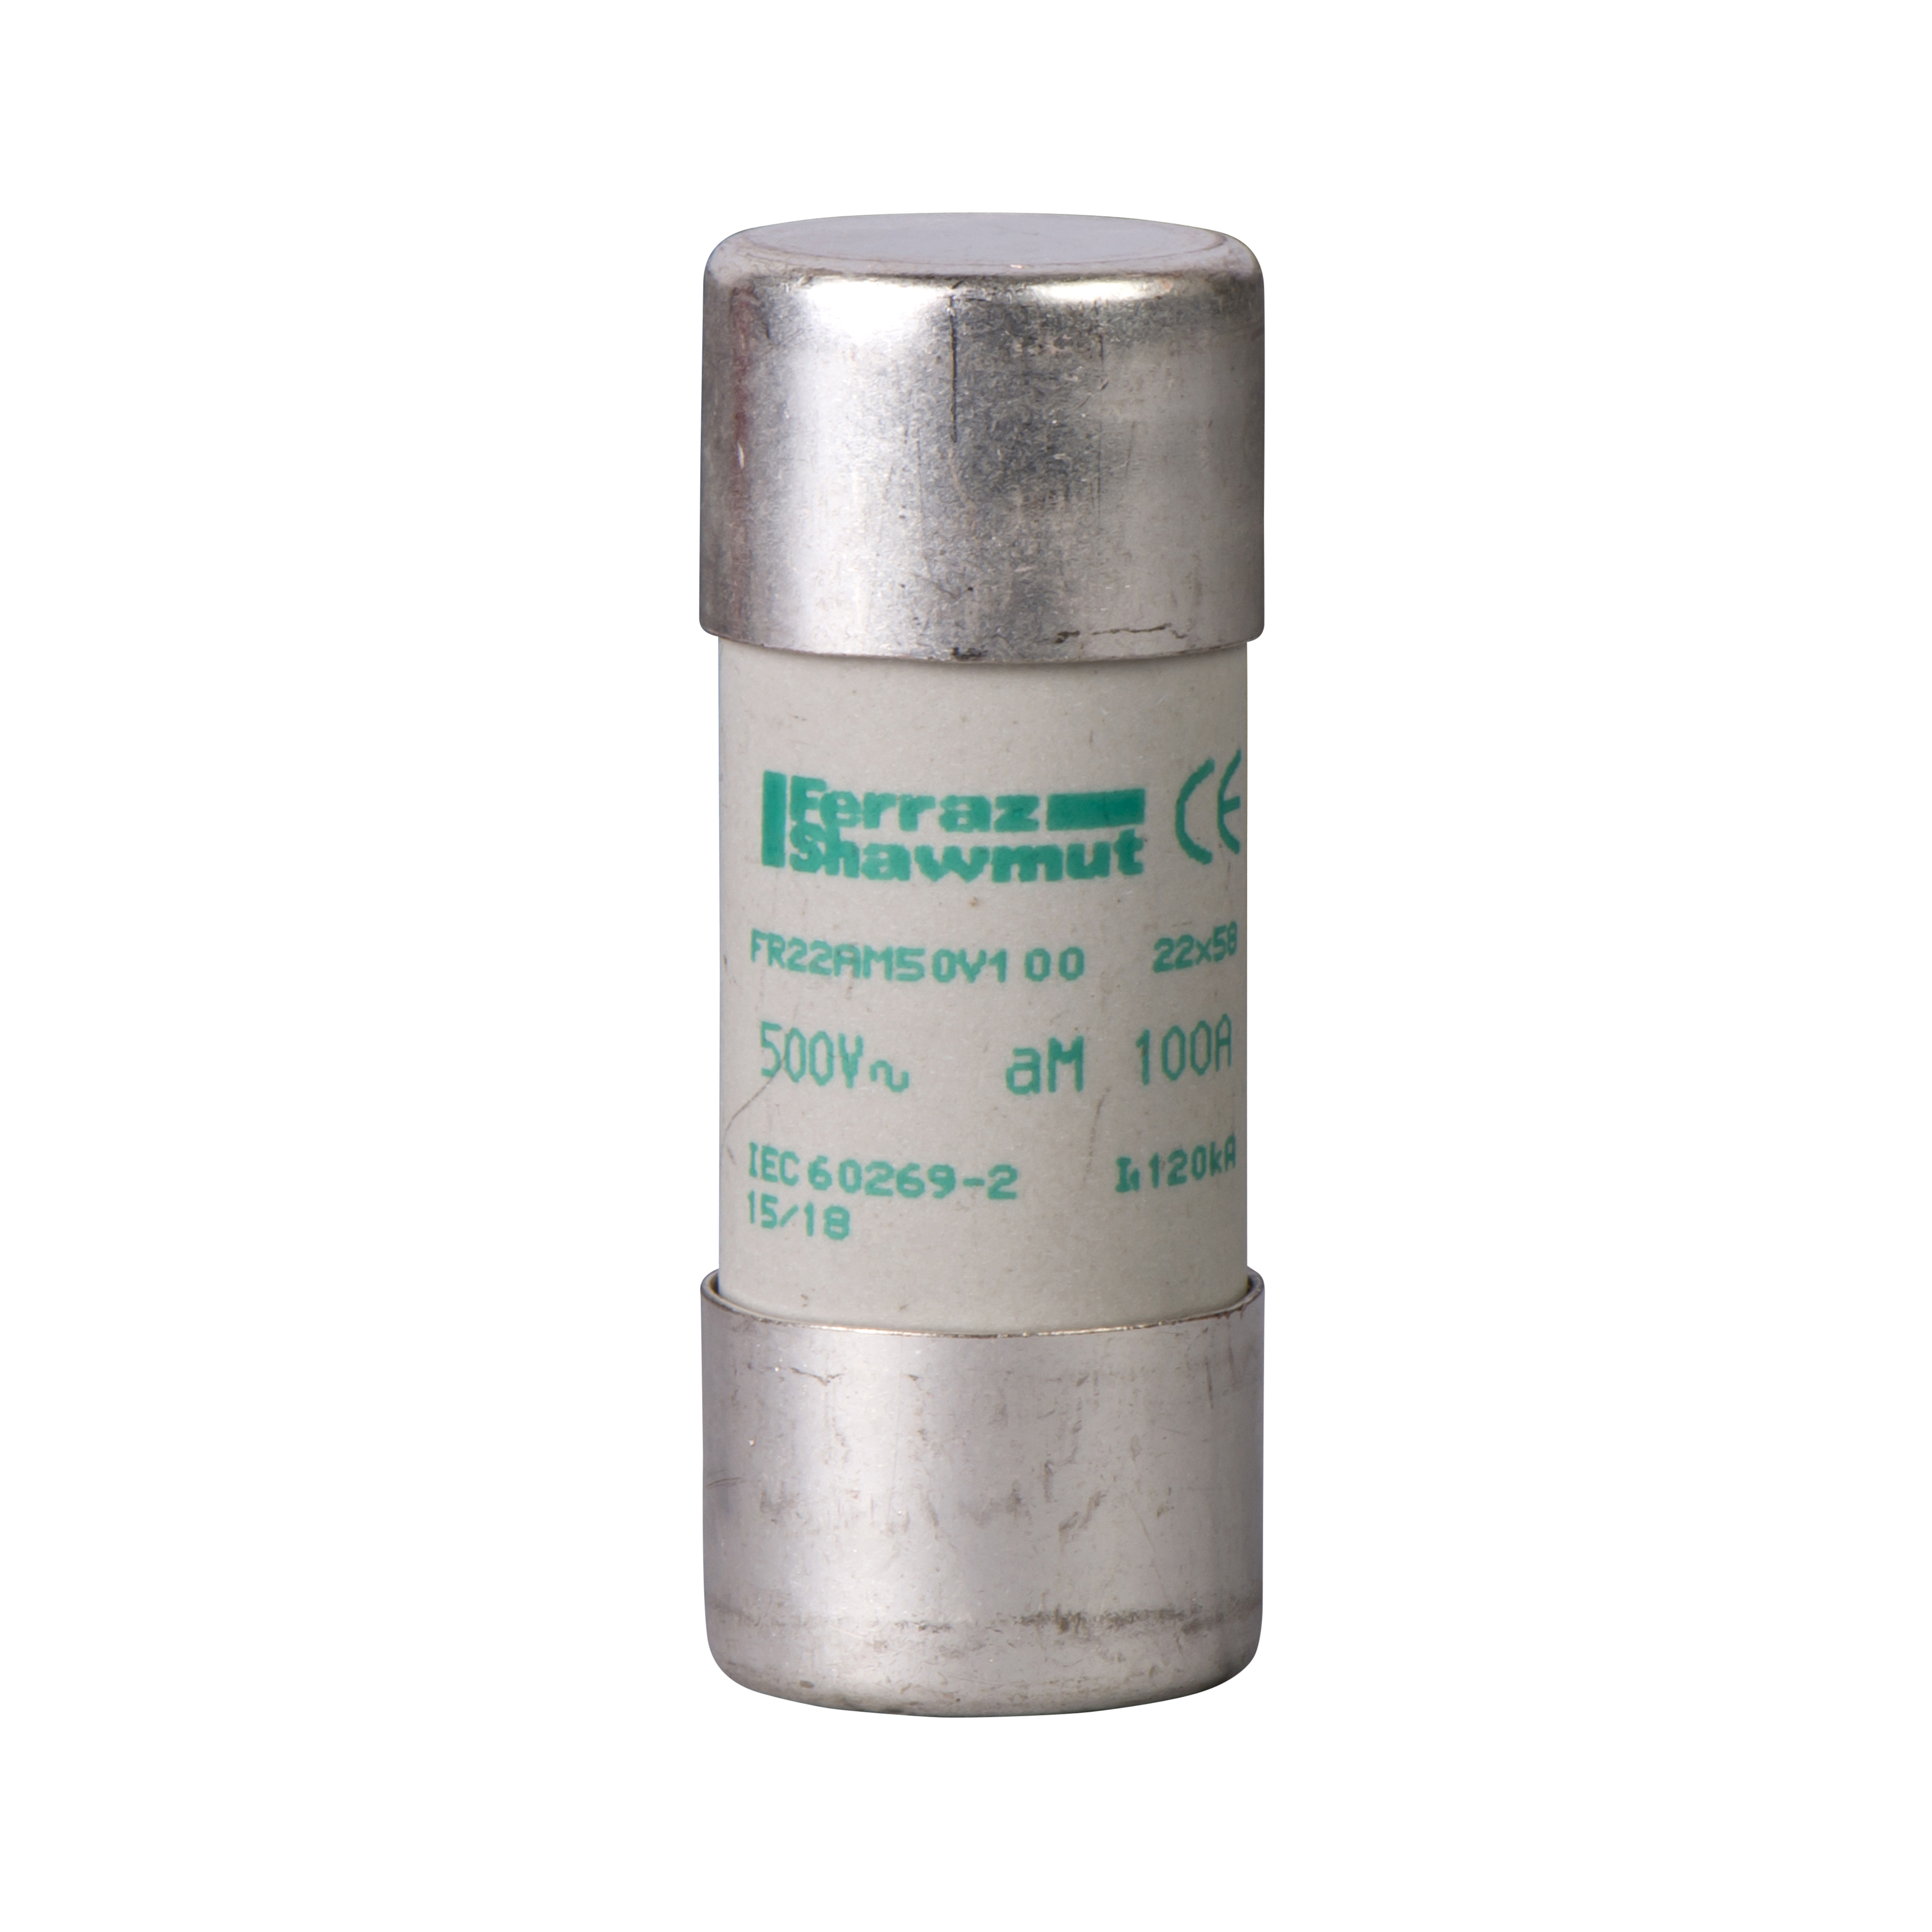 NFC cartridge fuses, TeSys GS, cylindrical, 22mm x 58mm, fuse type aM, 400VAC, 125A, without striker